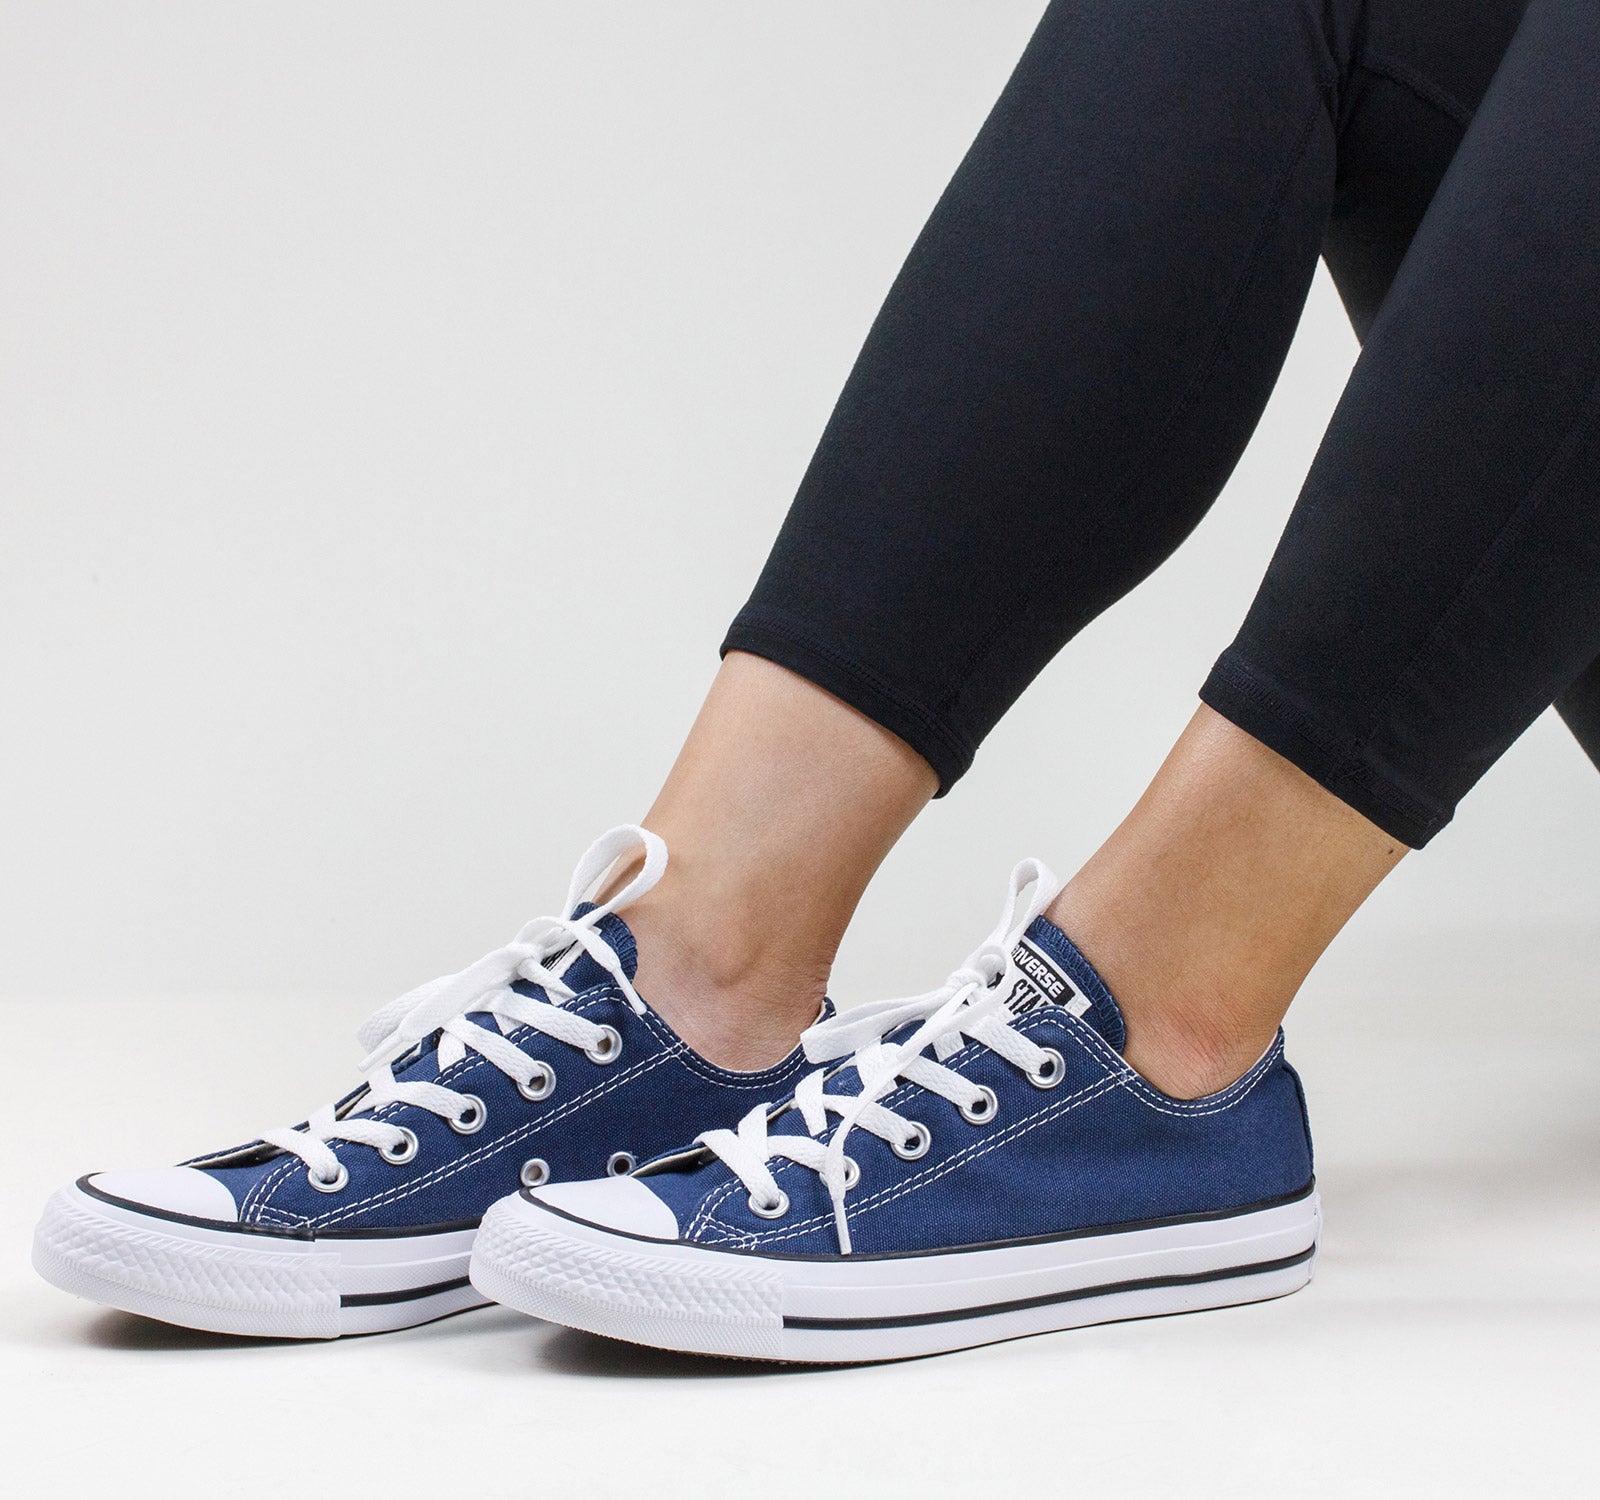 converse all star low navy